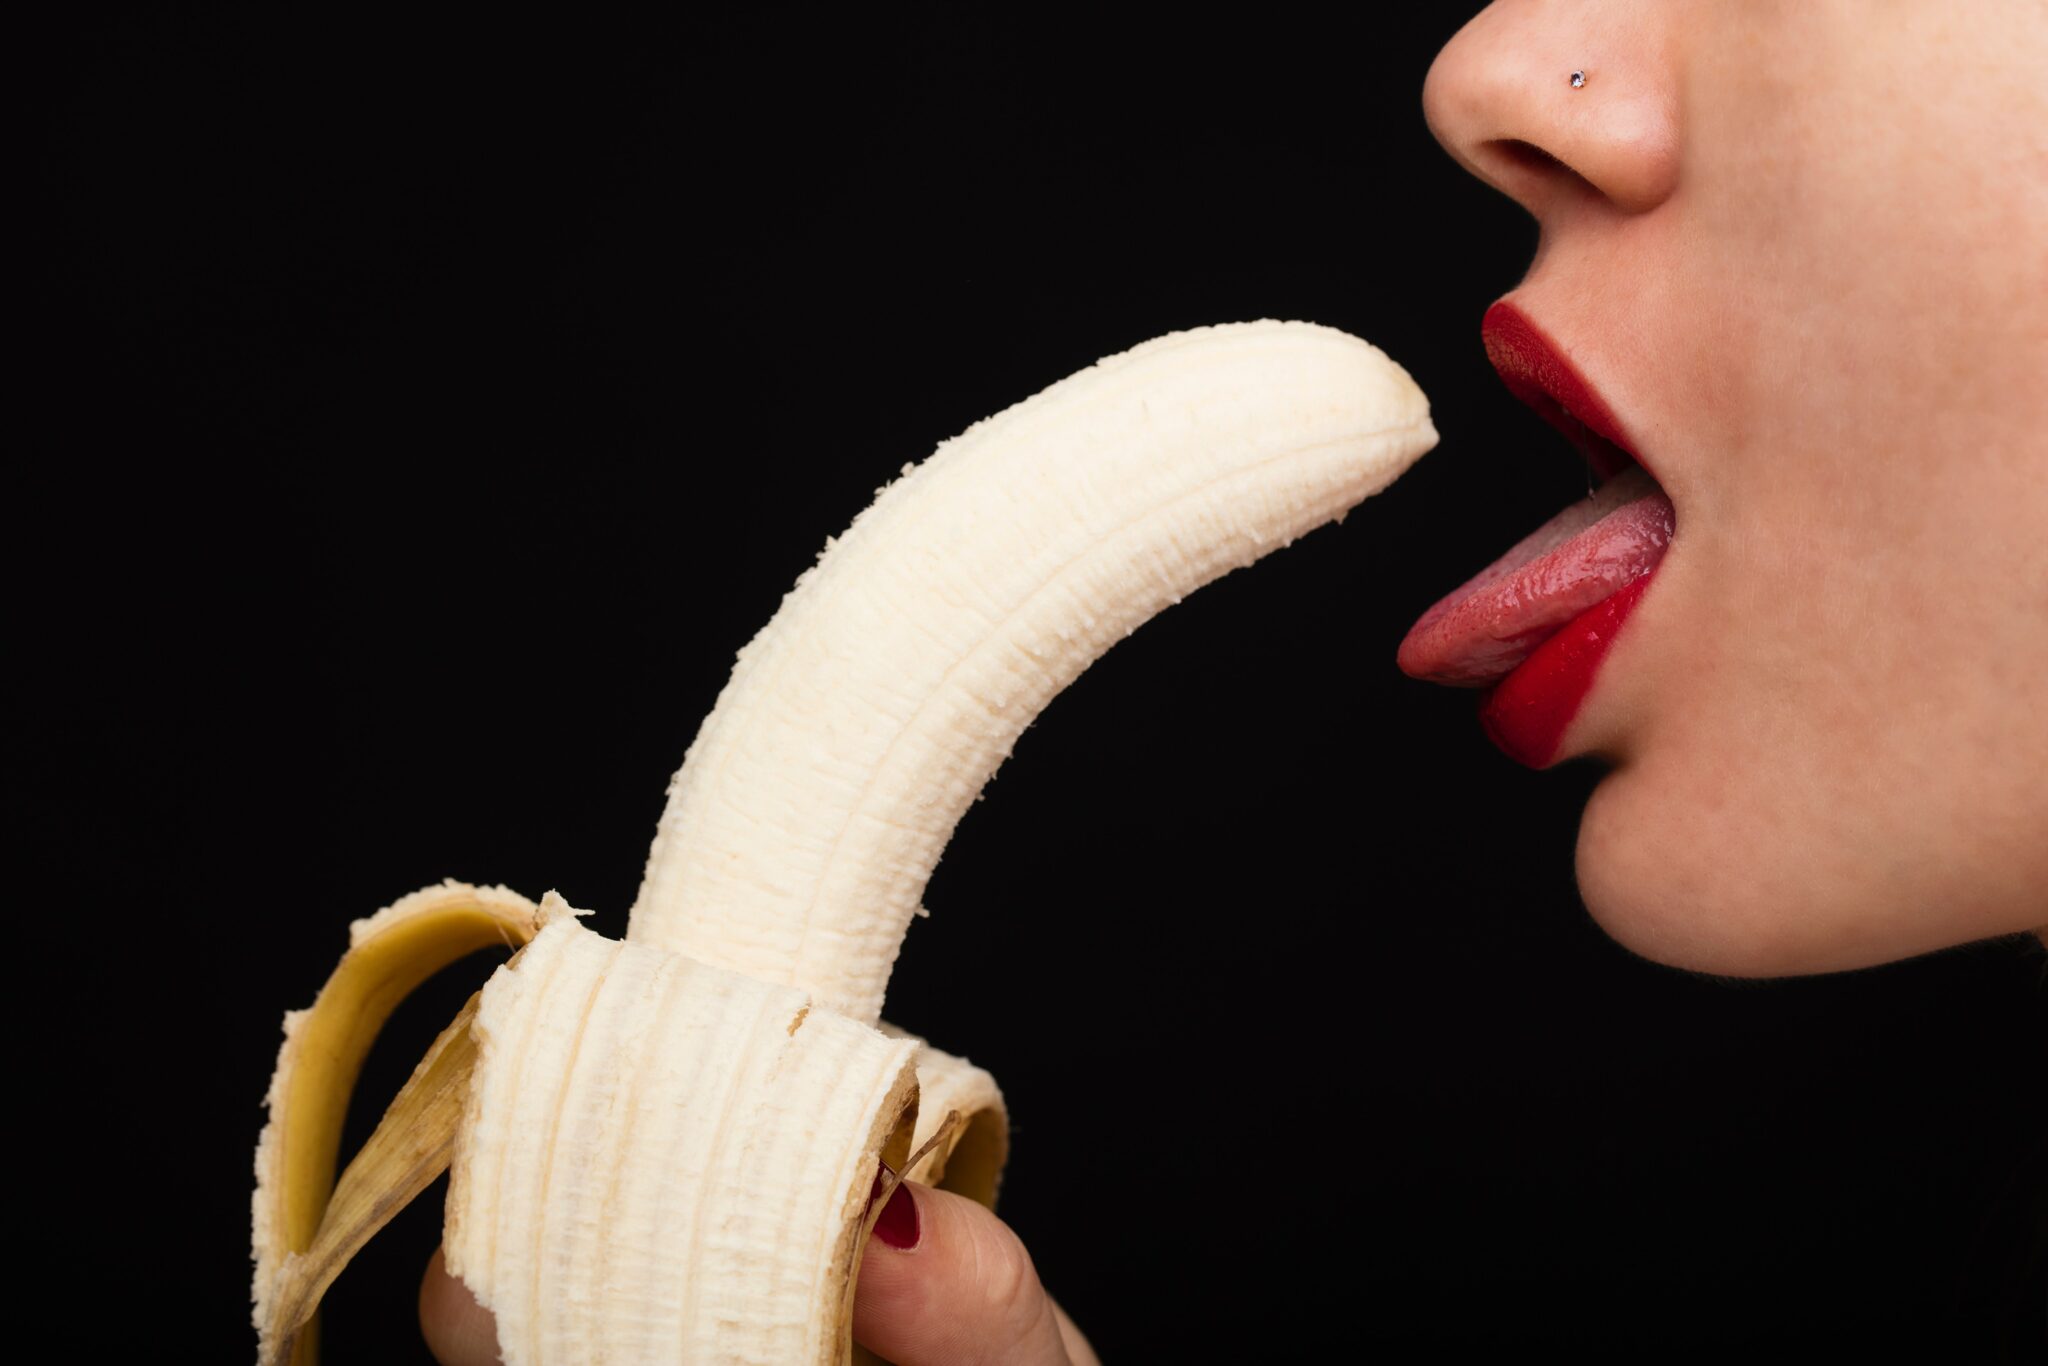 A woman holding a banana to her open mouth and tongue.